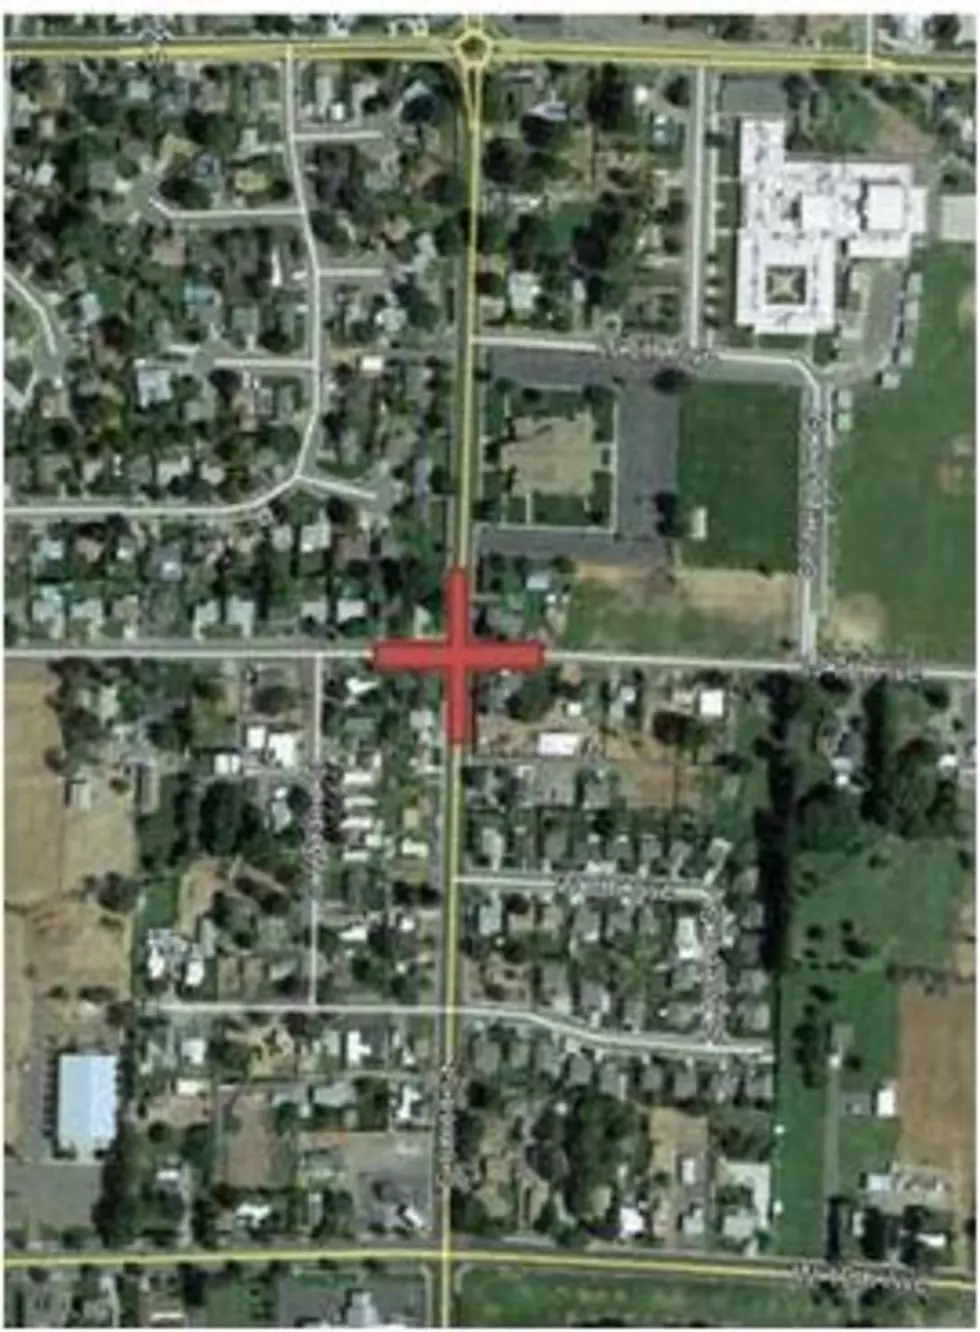 Traffic Alert for Kennewick Today Please Avoid 7th & Union